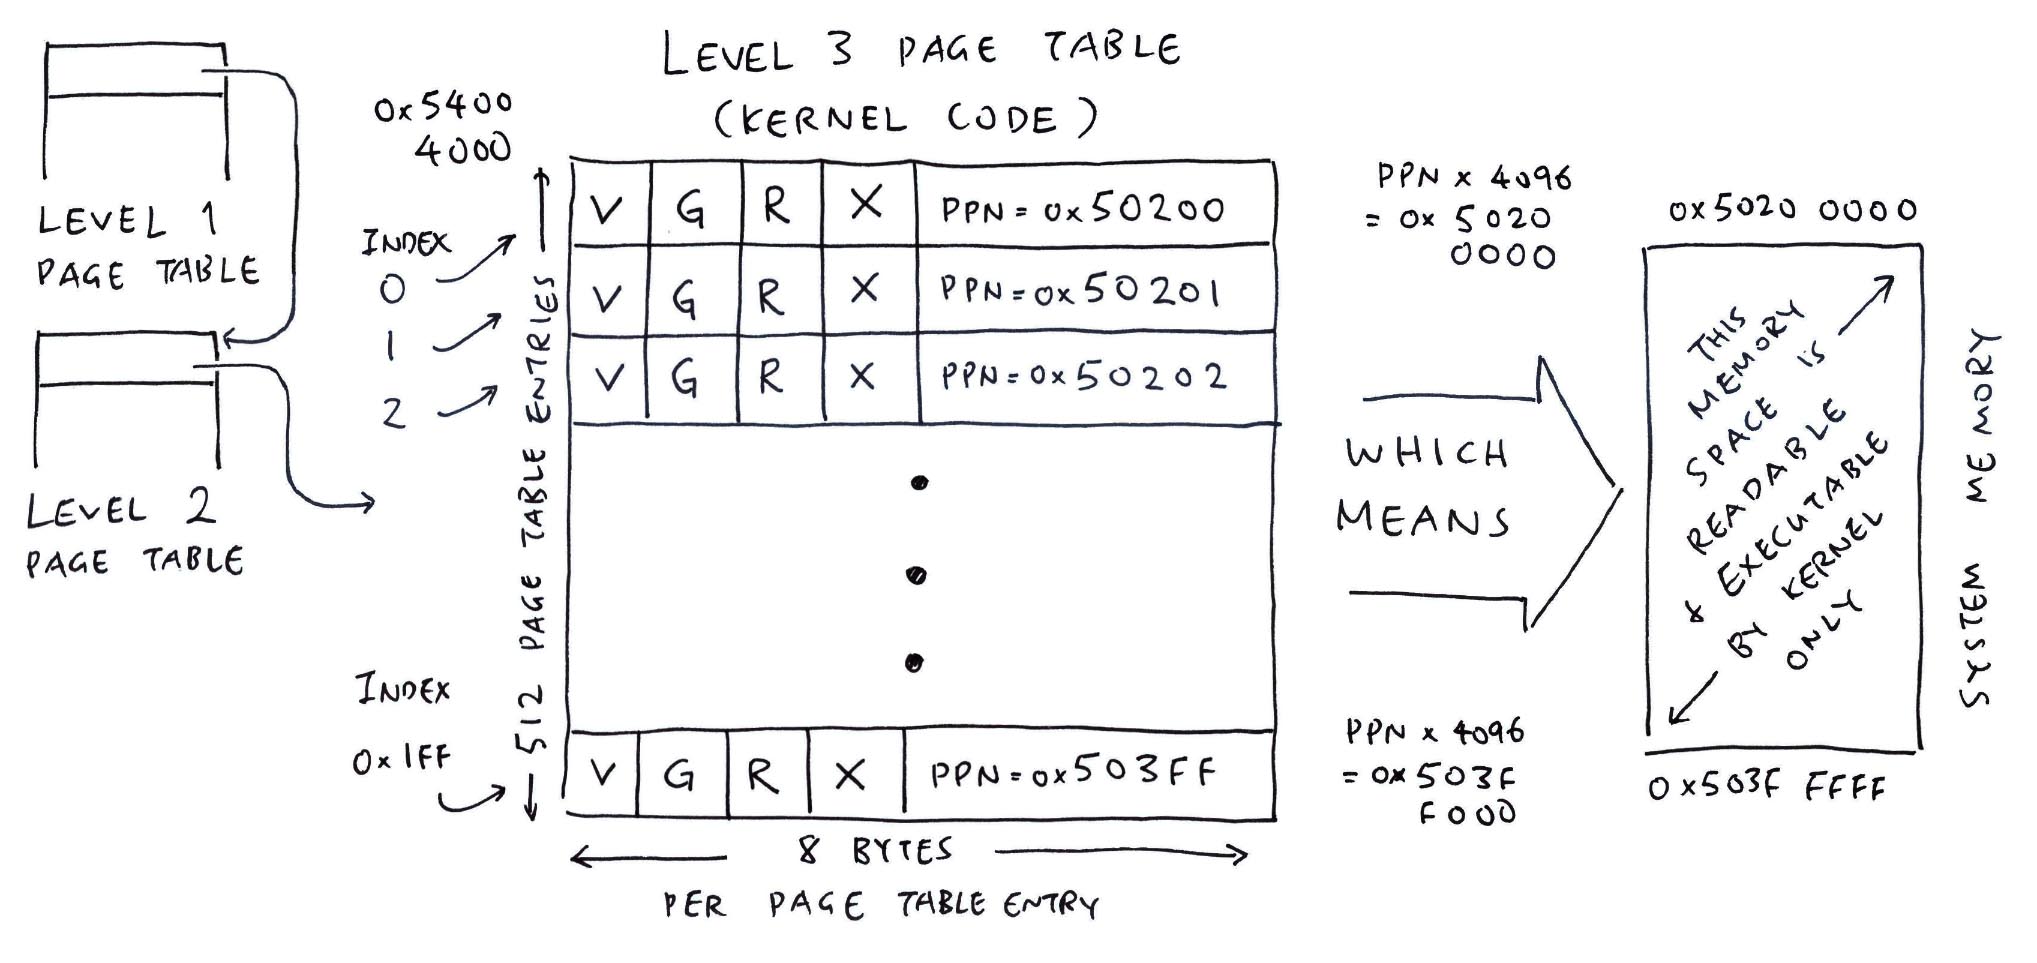 Level 3 Page Table for Kernel